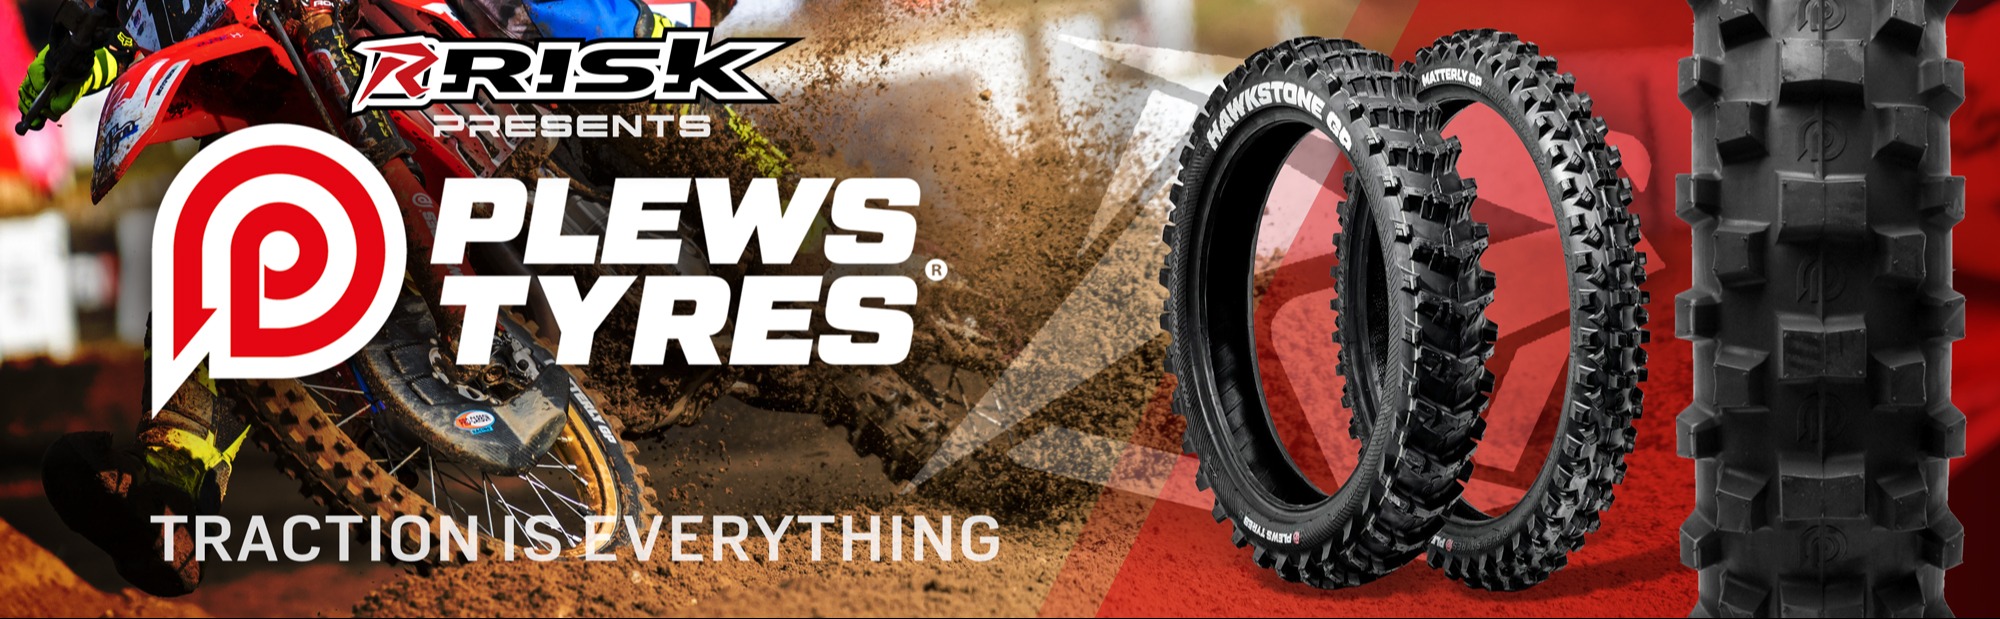 Risk Racing Brings Plews Tyres to the USA 261